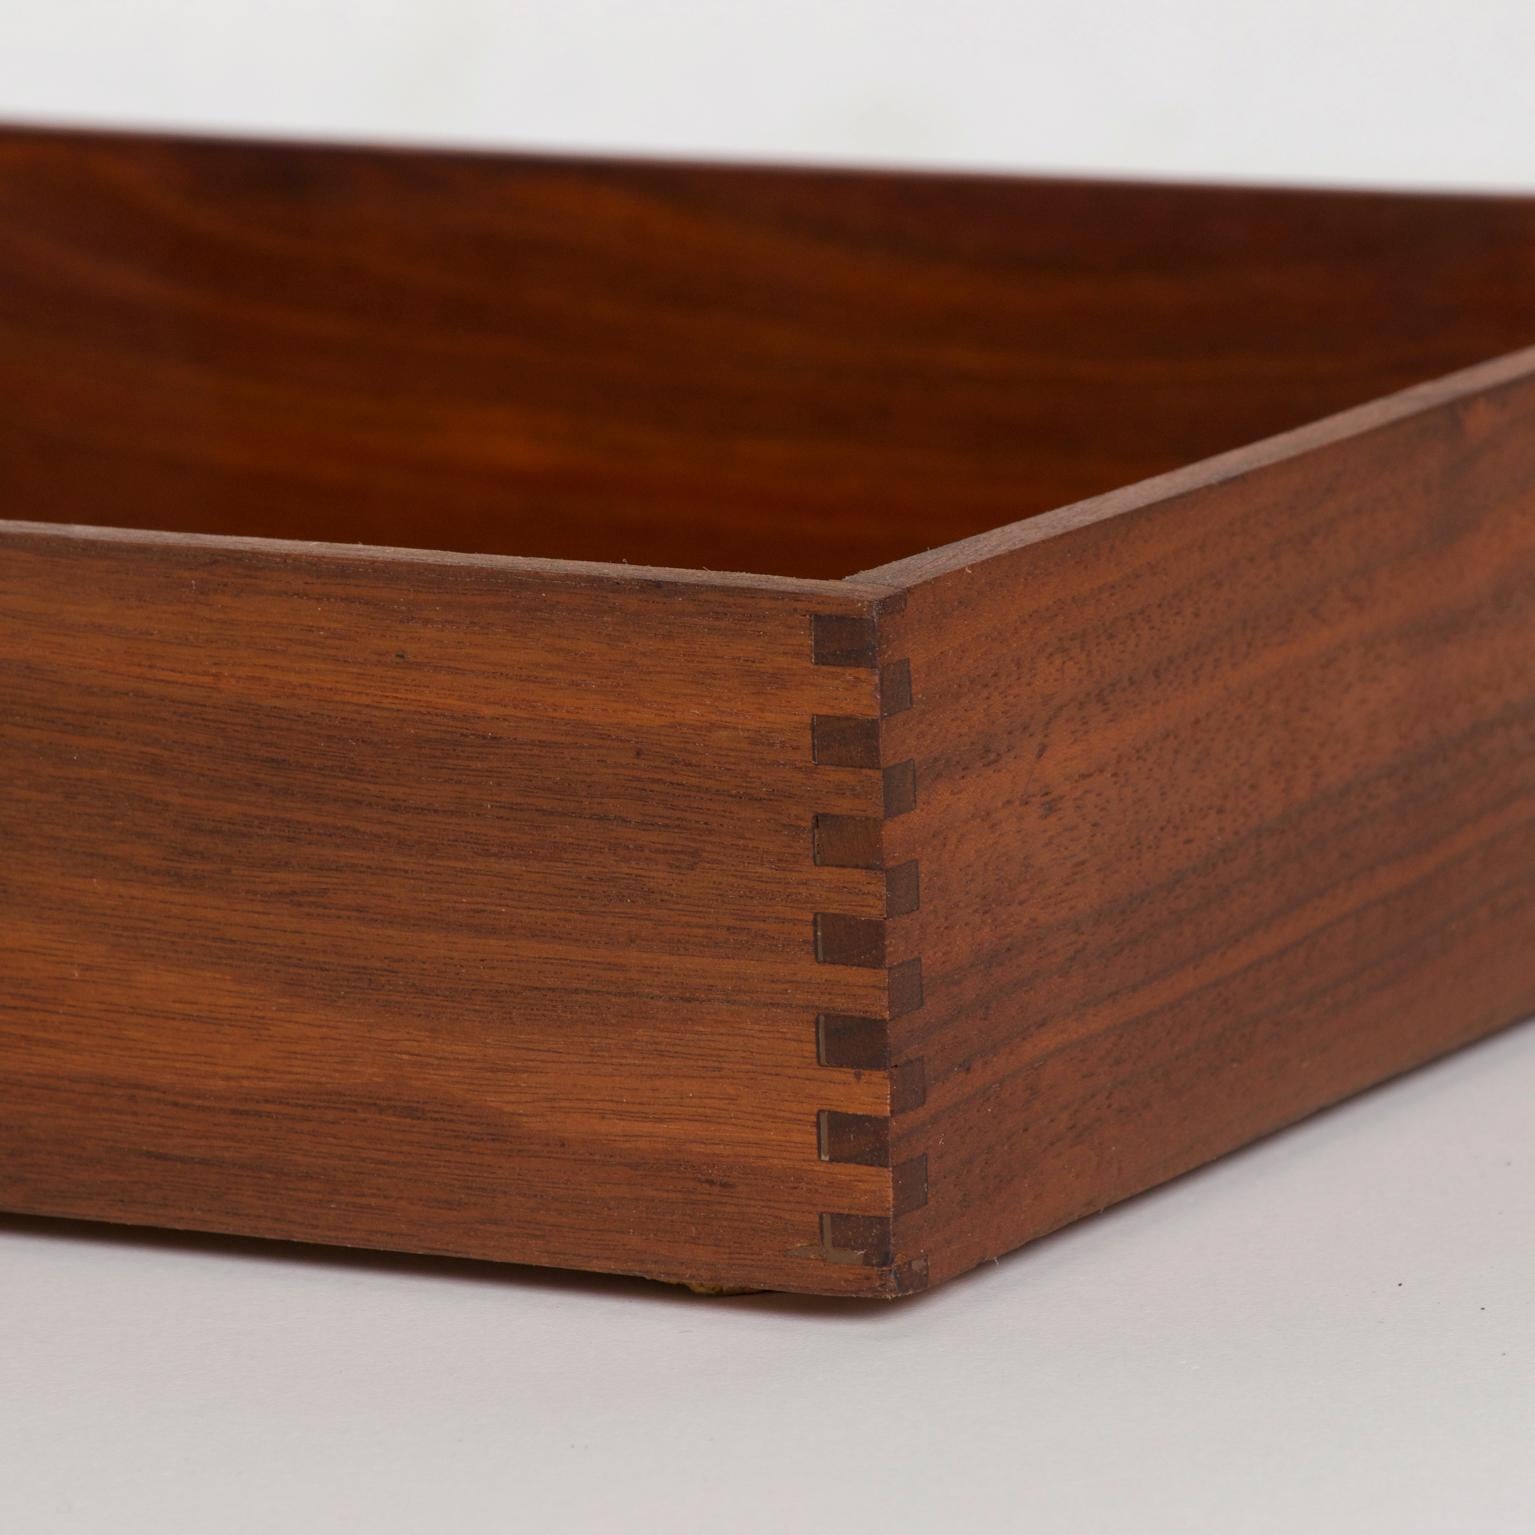 For your consideration: Walnut Mid-Century Modern desk tray inbox sorter.
 Dimensions are: 15